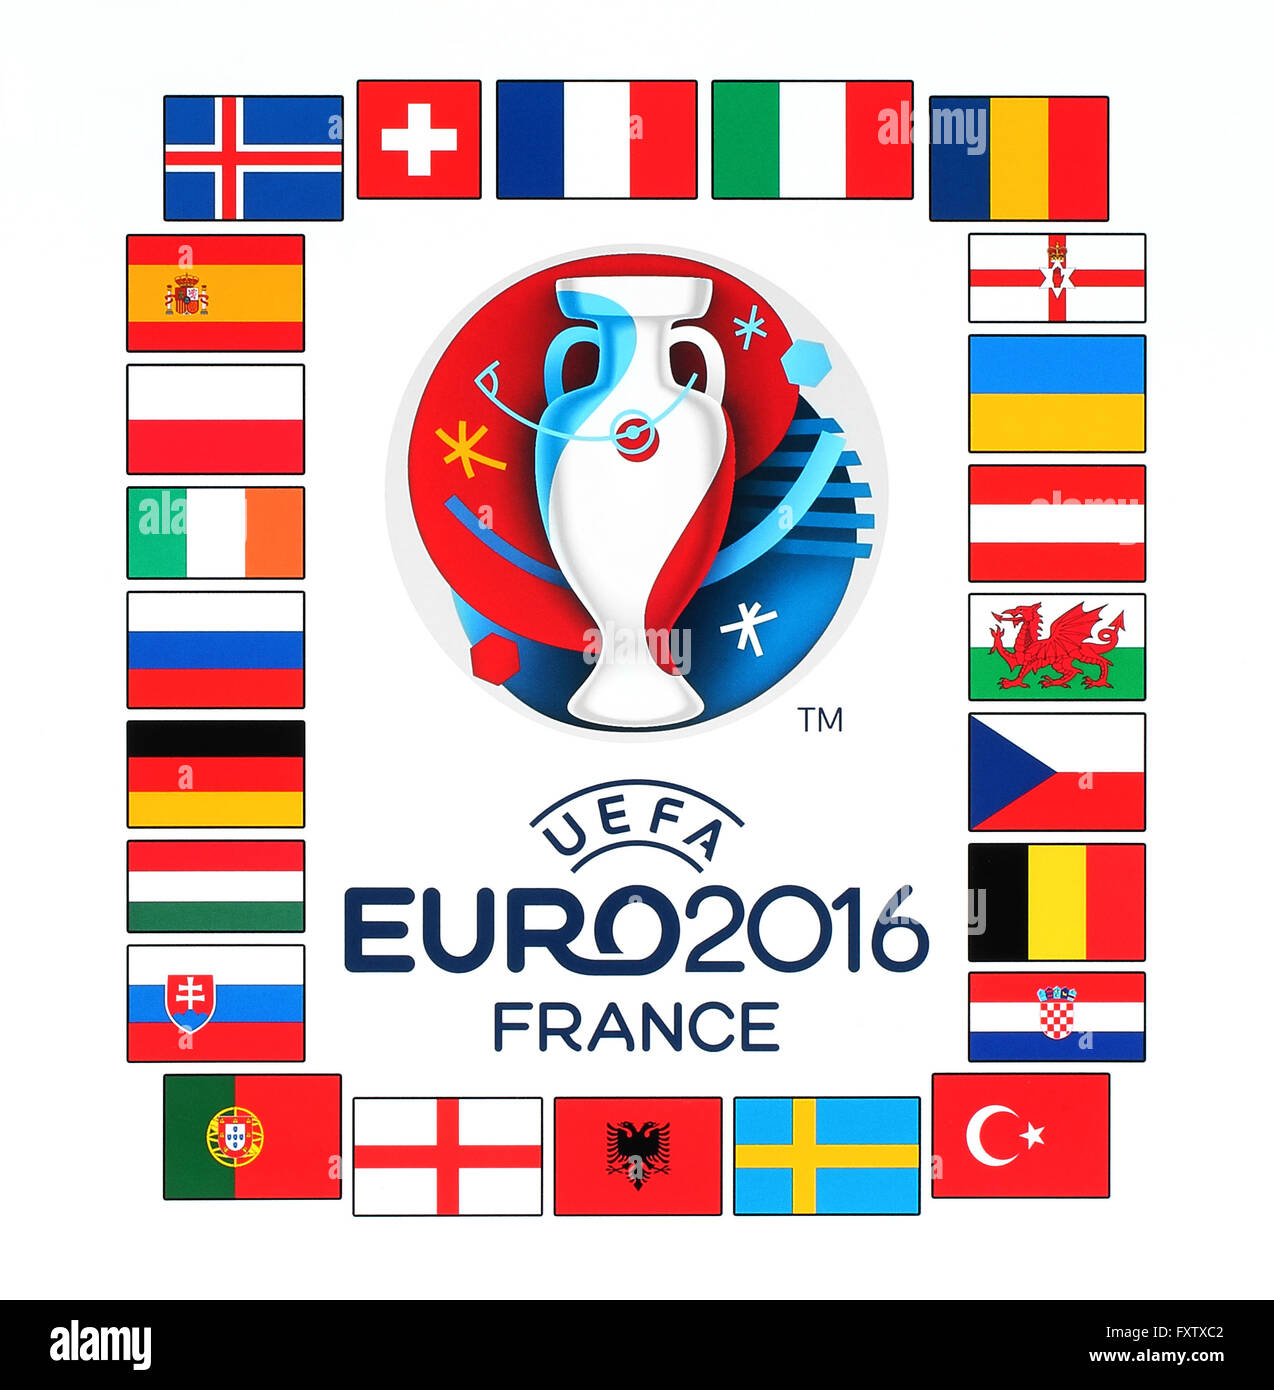 Official Logo Of The 16 Uefa European Championship In France With Flags Of The Countries Participants Stock Photo Alamy